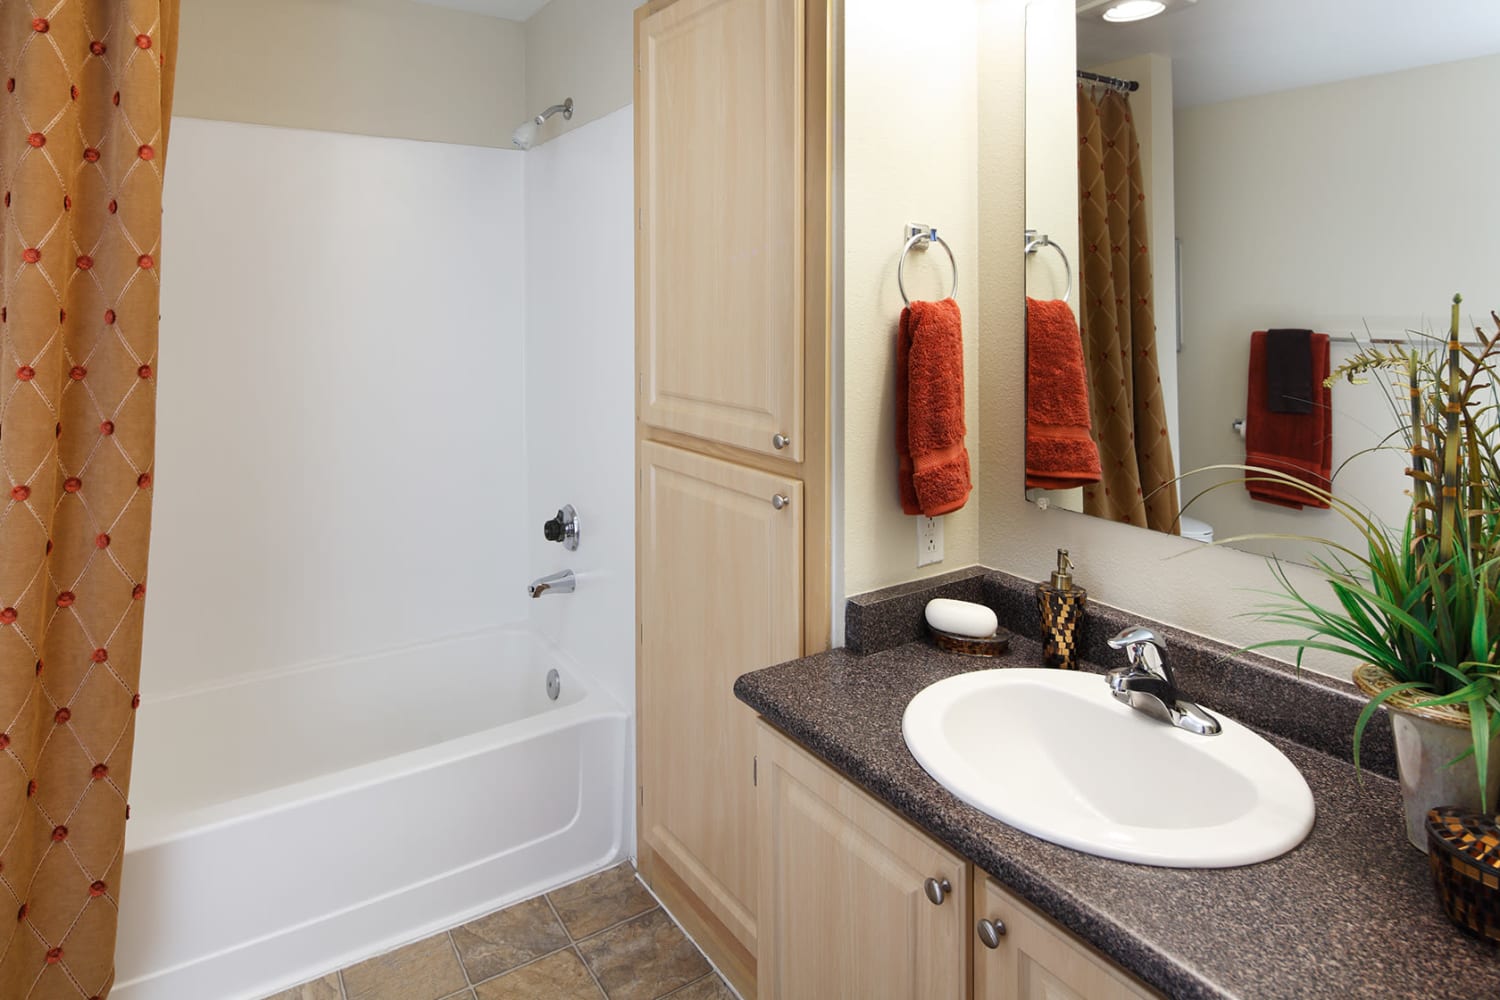 Bathroom in model apartment at Redmond Place Apartments in Redmond, Washington